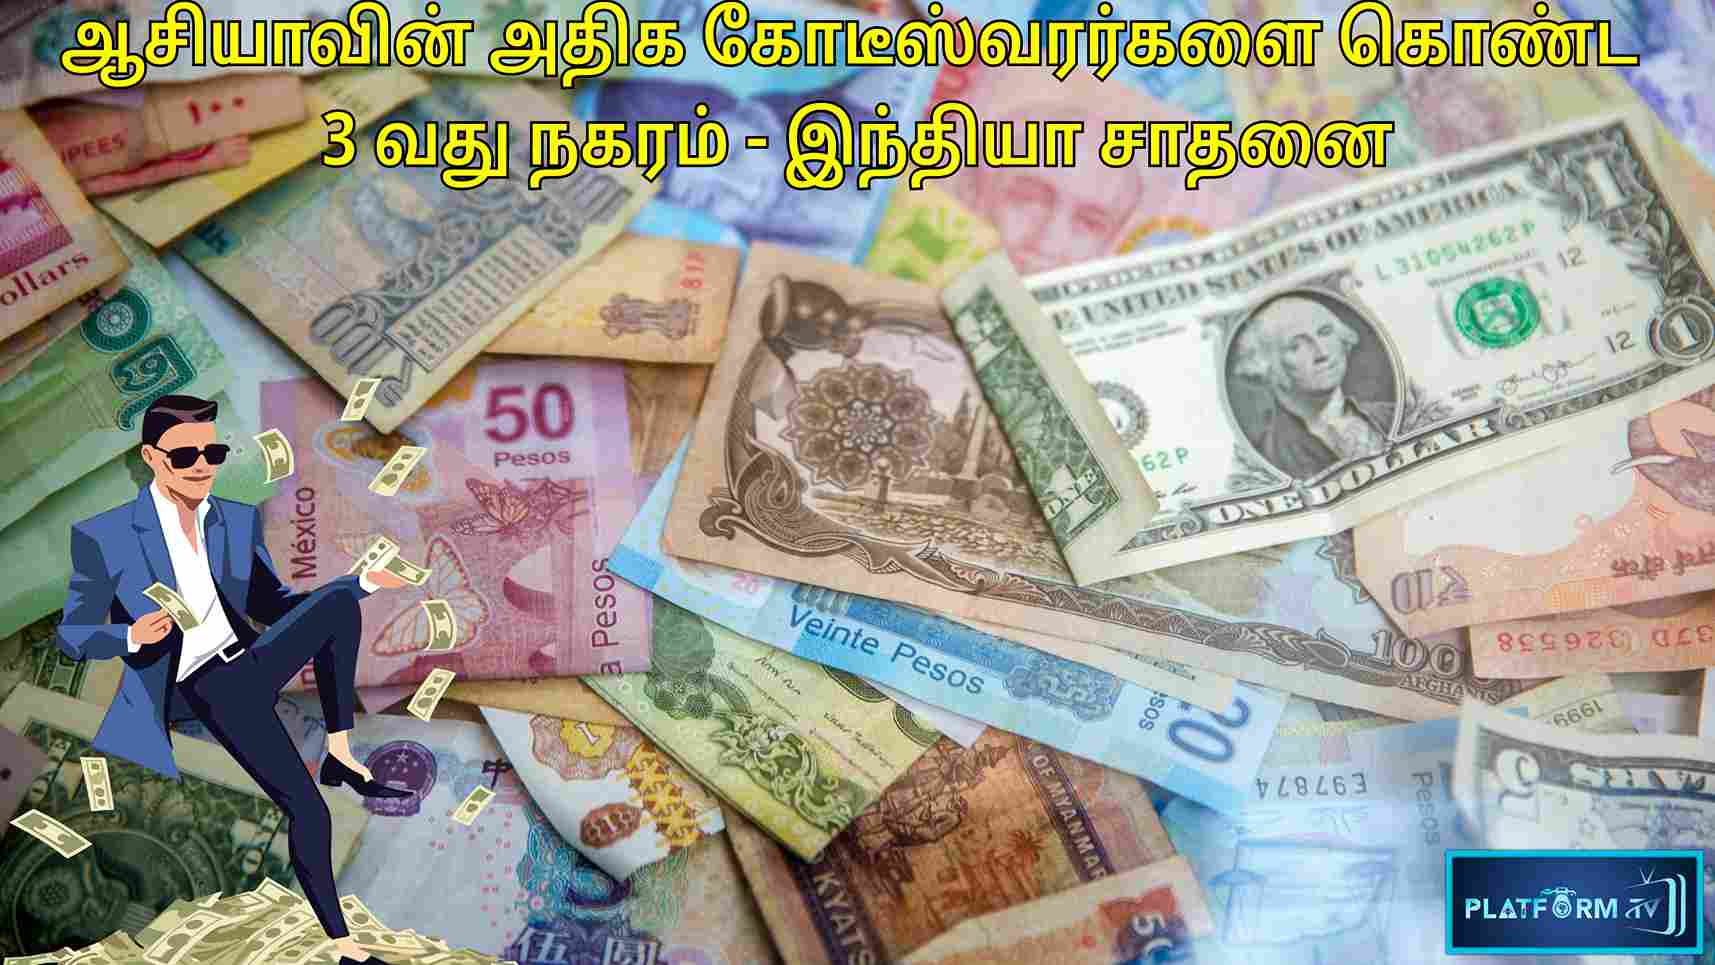 City With Most Millionaires In Asia - Platform Tamil